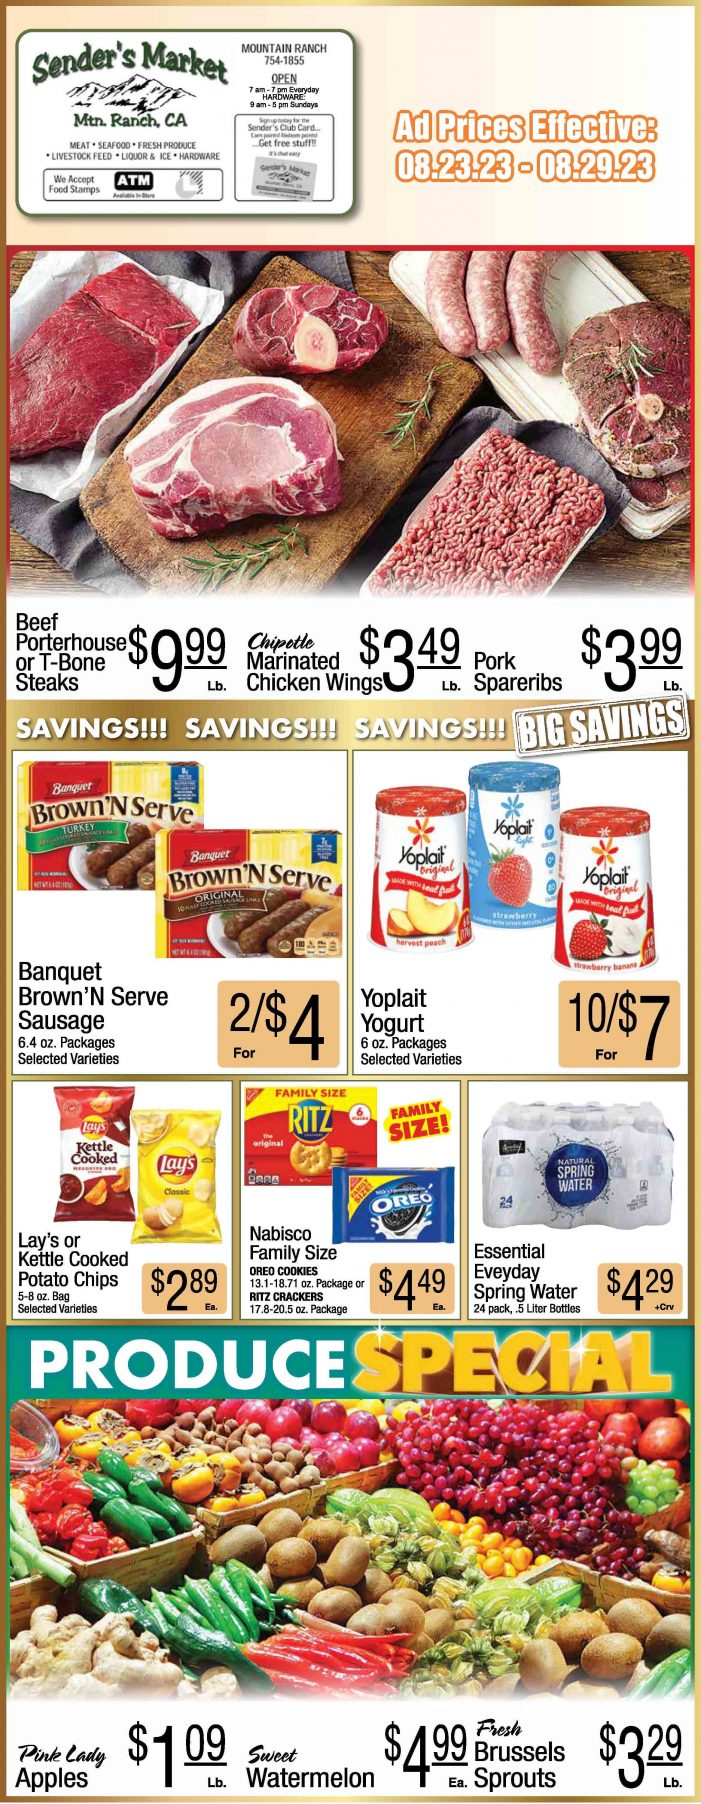 Sender’s Market Weekly Ad & Grocery Specials Through August 29th! Shop Local & Save!!